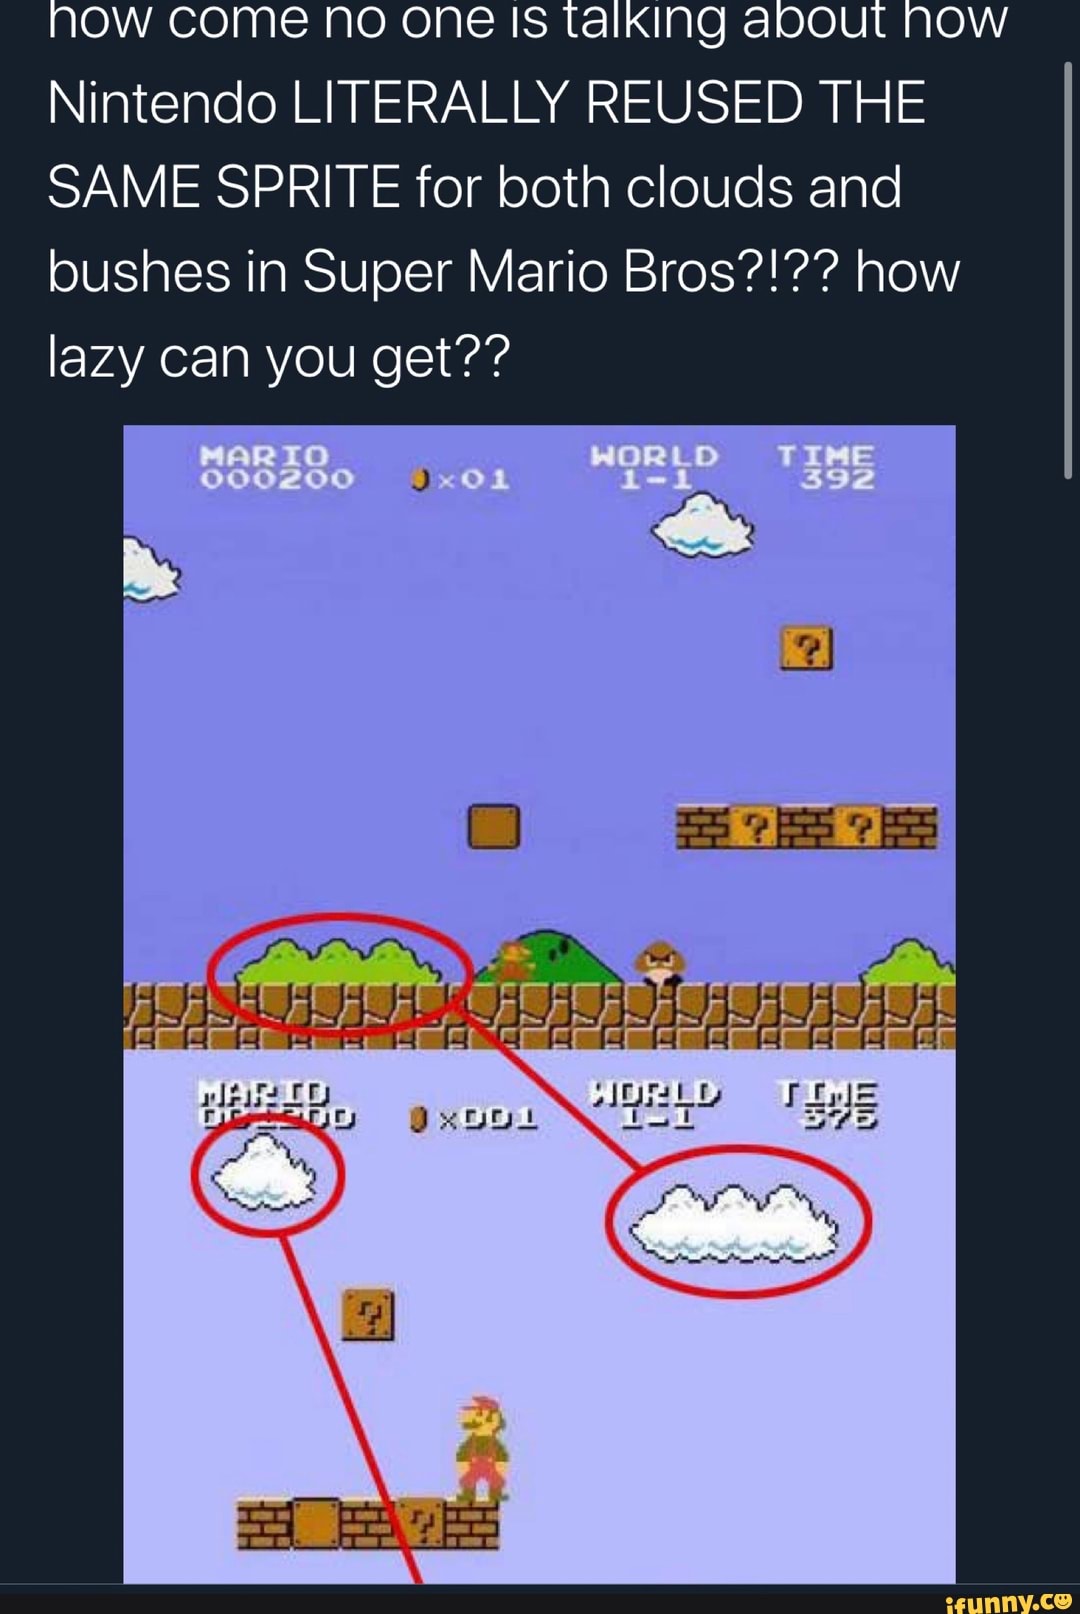 Ow Come No One Is Talking Abou Nintendo Literally Reused The Same Sprite For Both Clouds And 6879